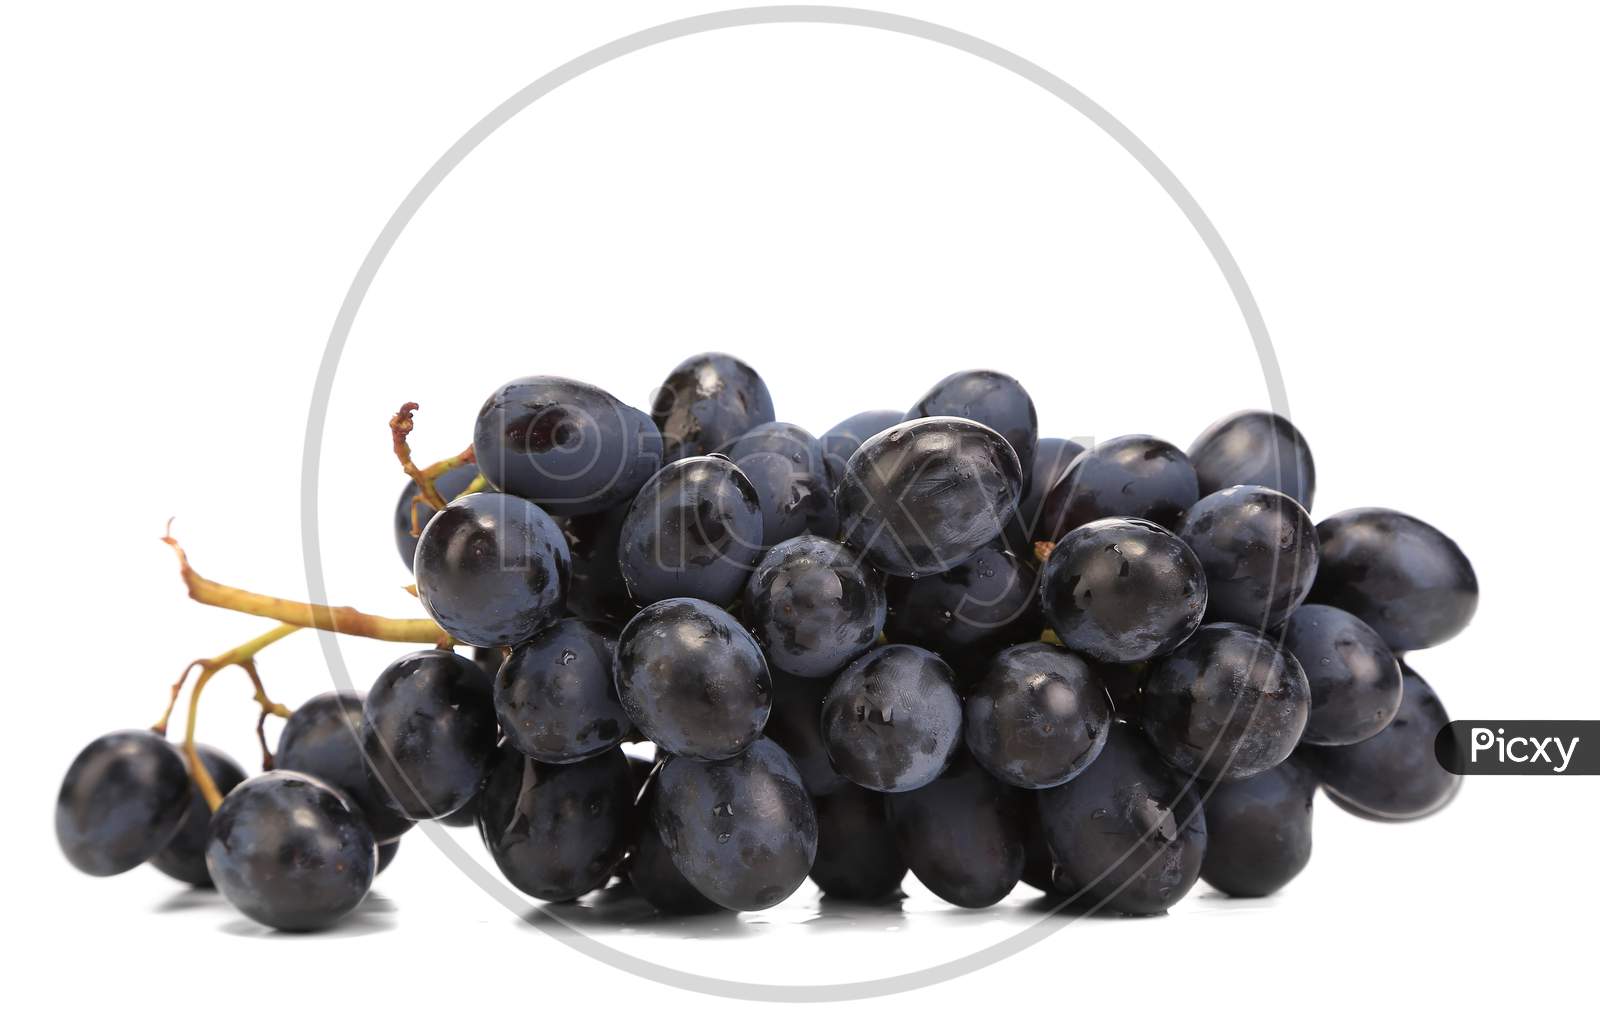 Branch Of Black Ripe Grapes. Isolated On A White Background.